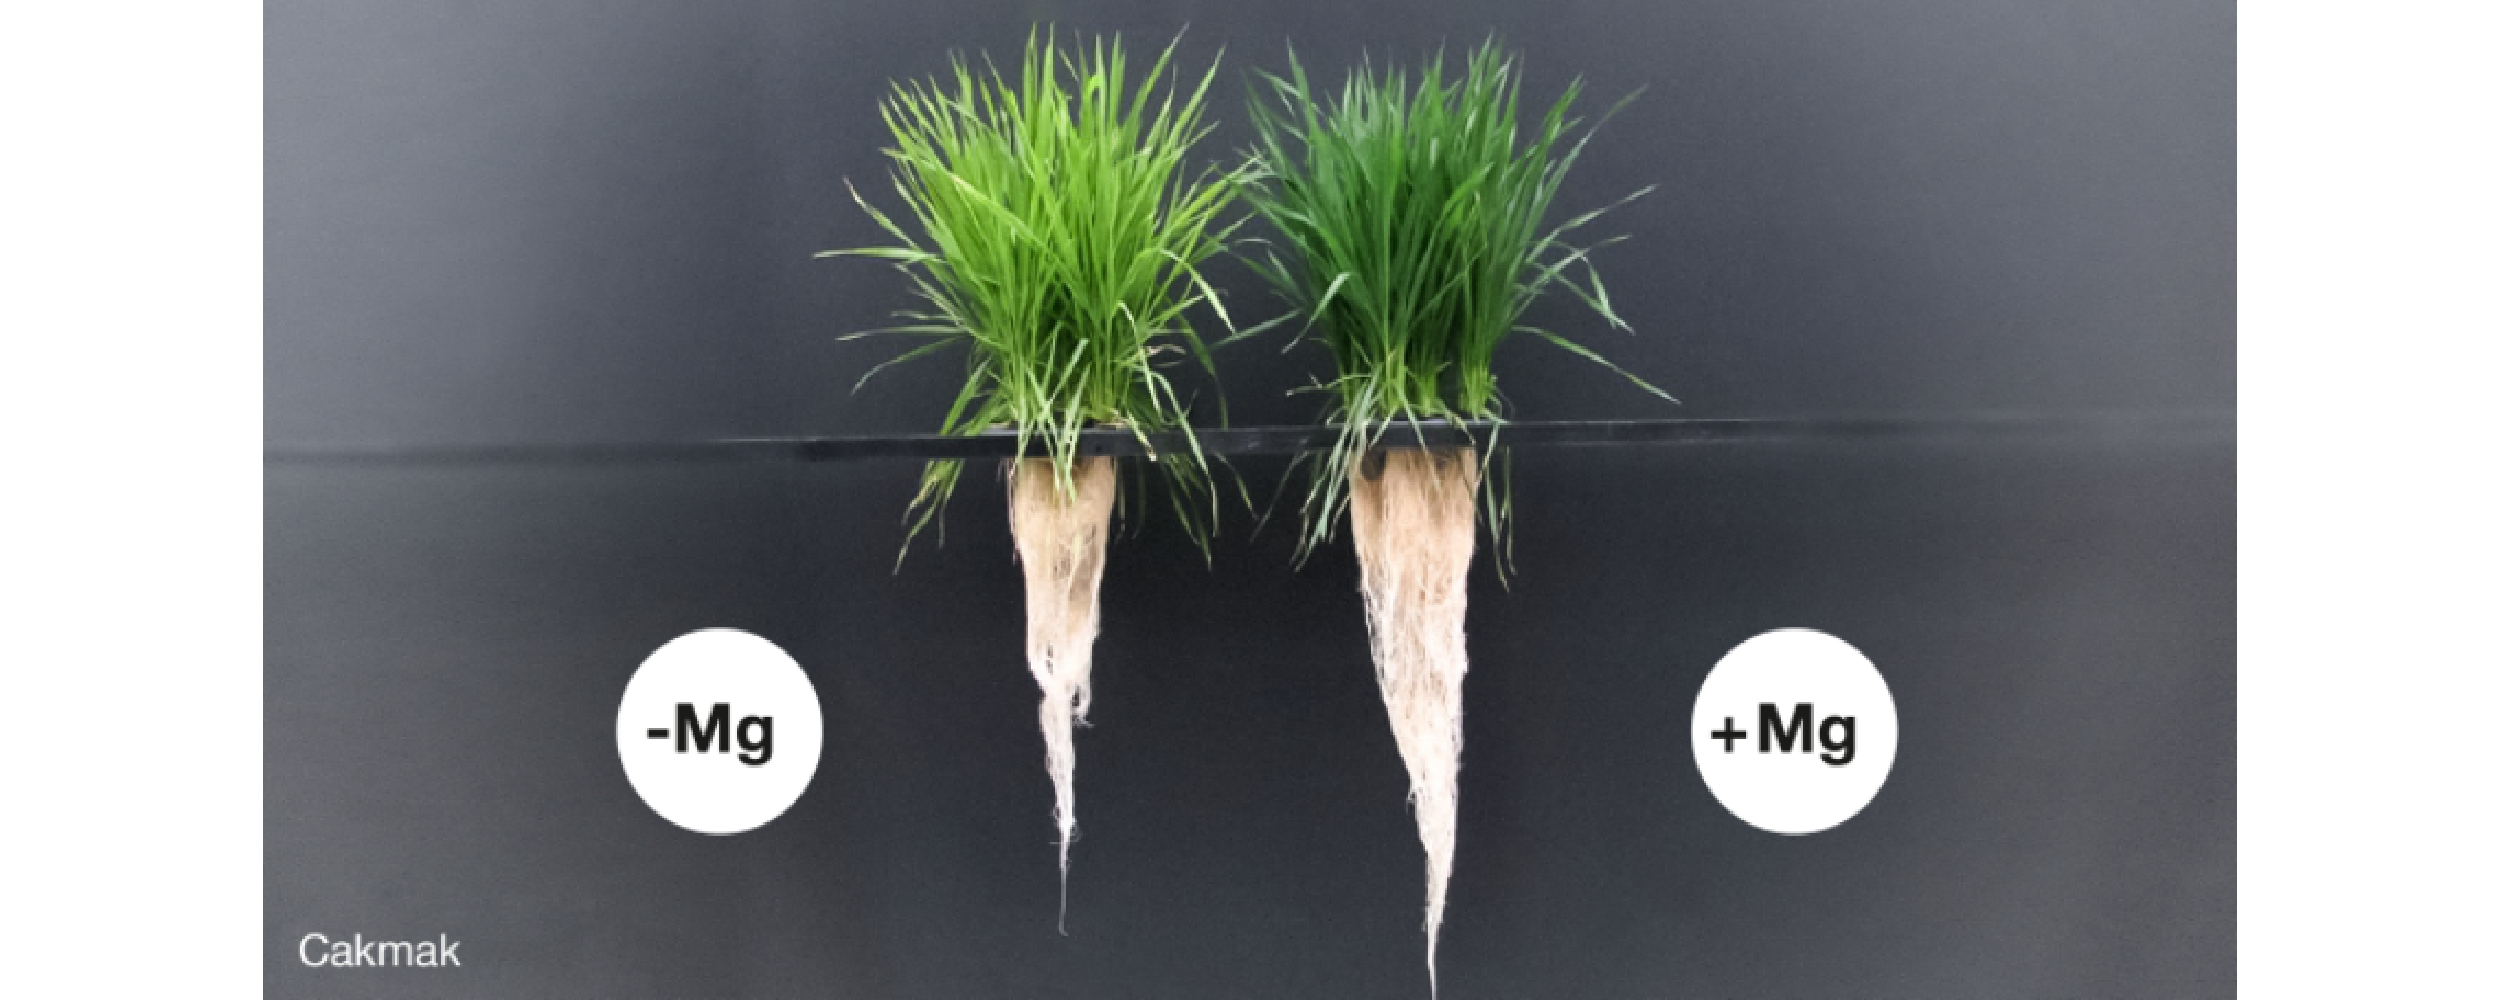 Magnesium deficiency (left) leads to reduced root growth.